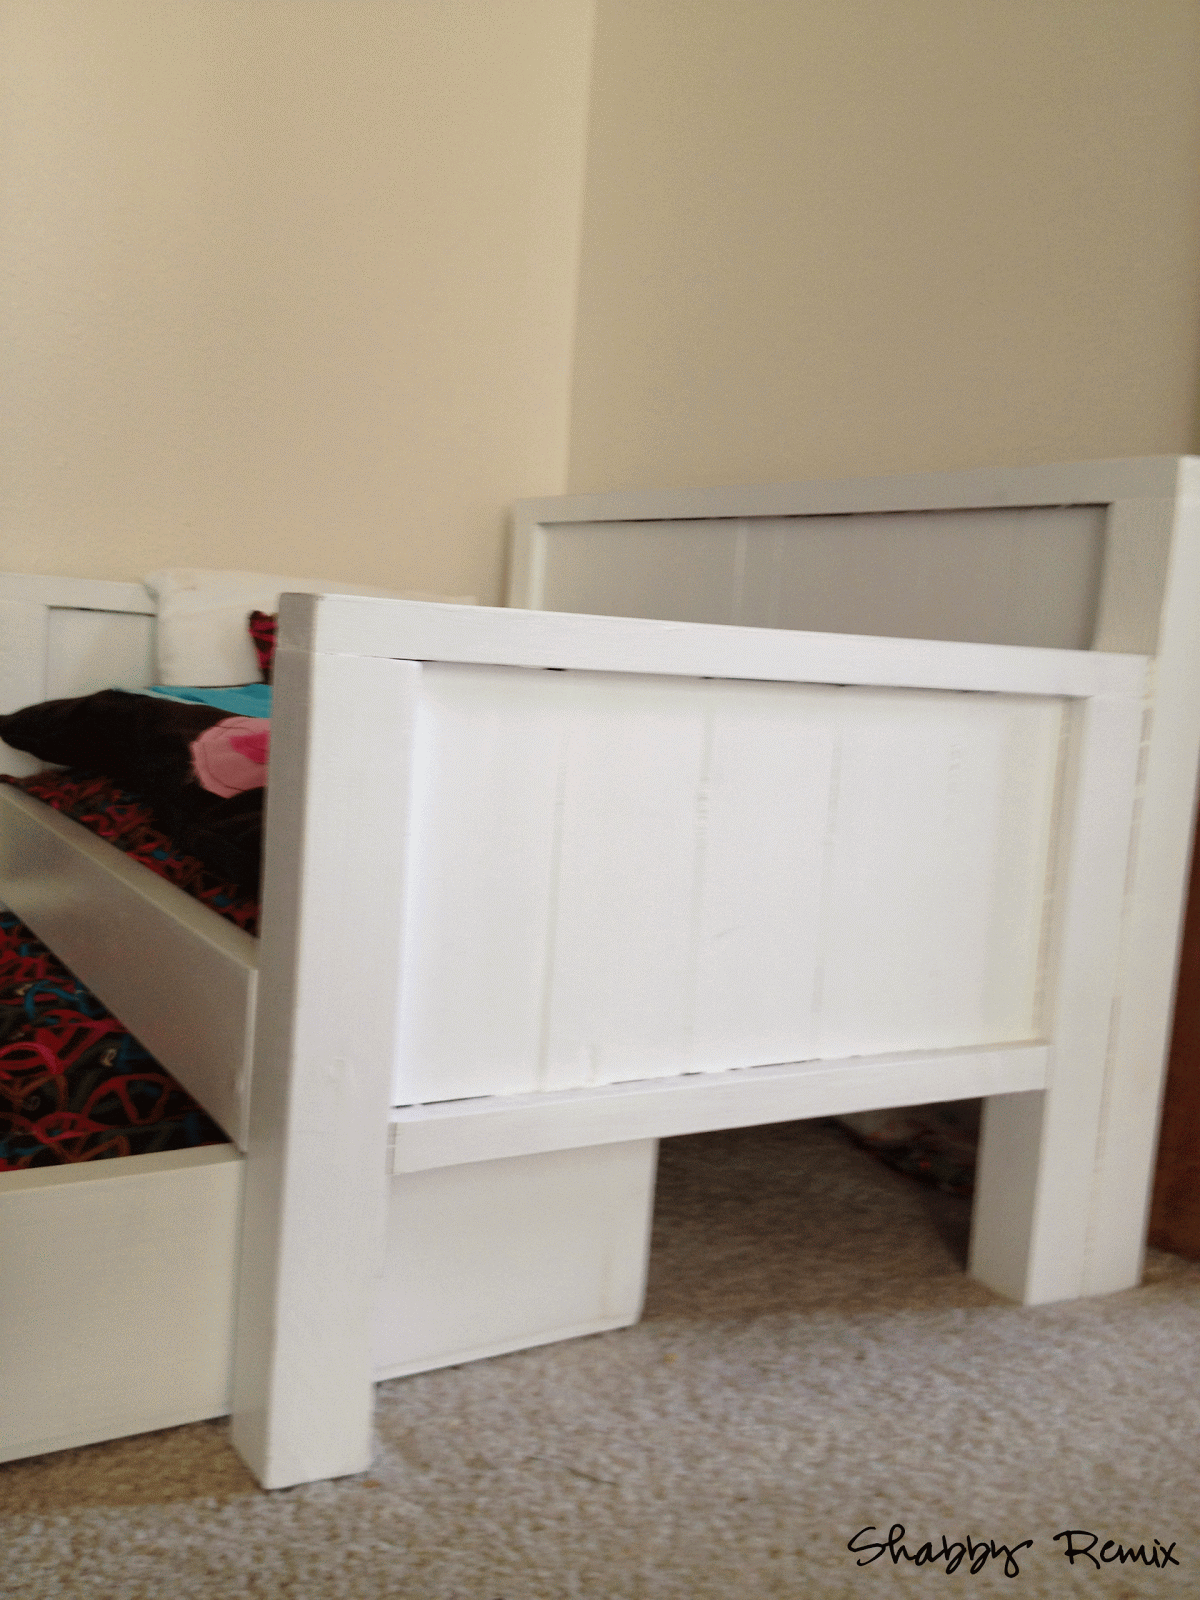 Shabby Remix: American Girl Doll Bed